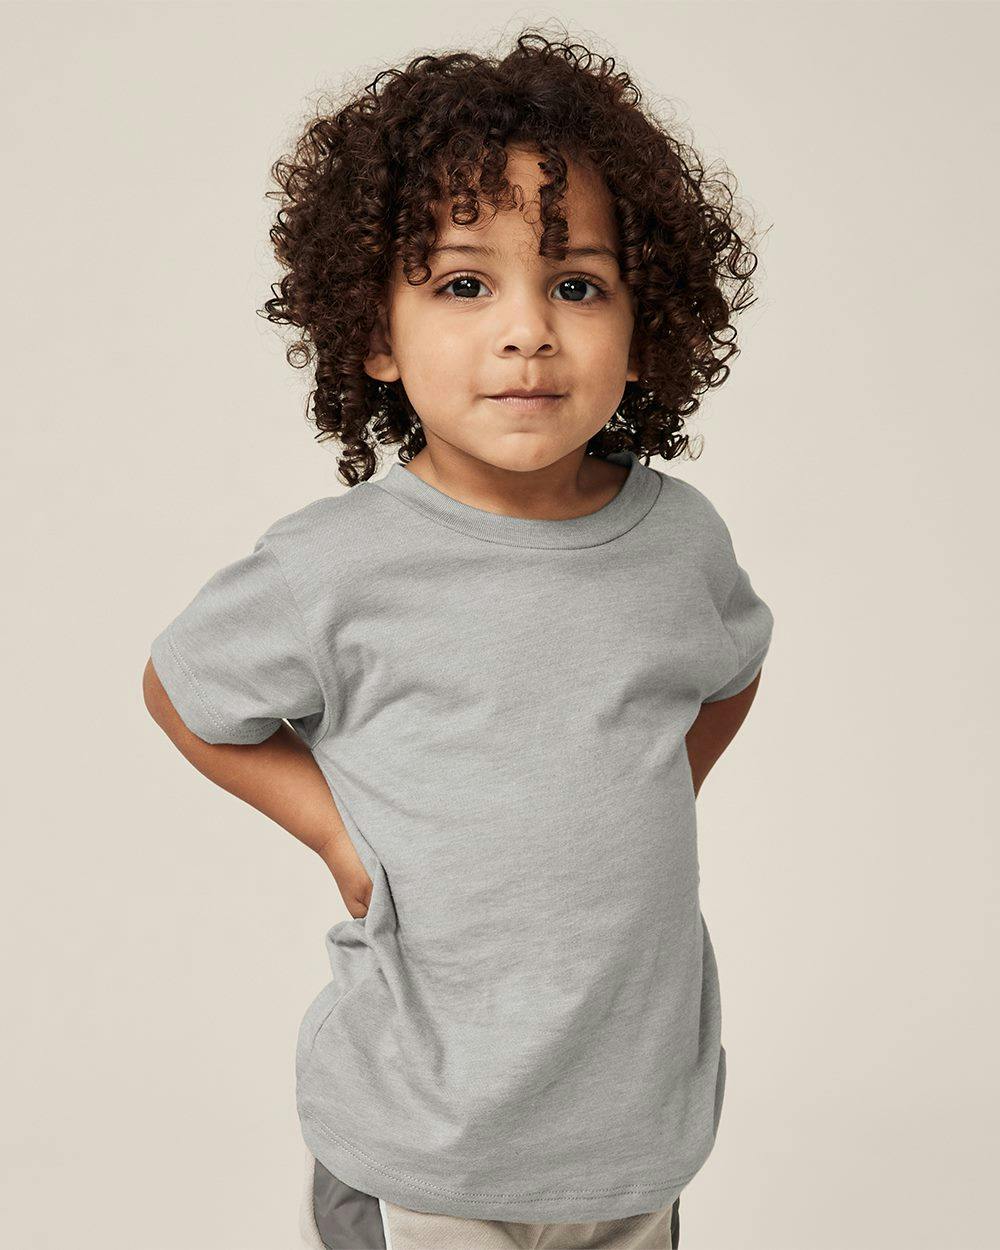 Image for Toddler Triblend Tee - 3413T